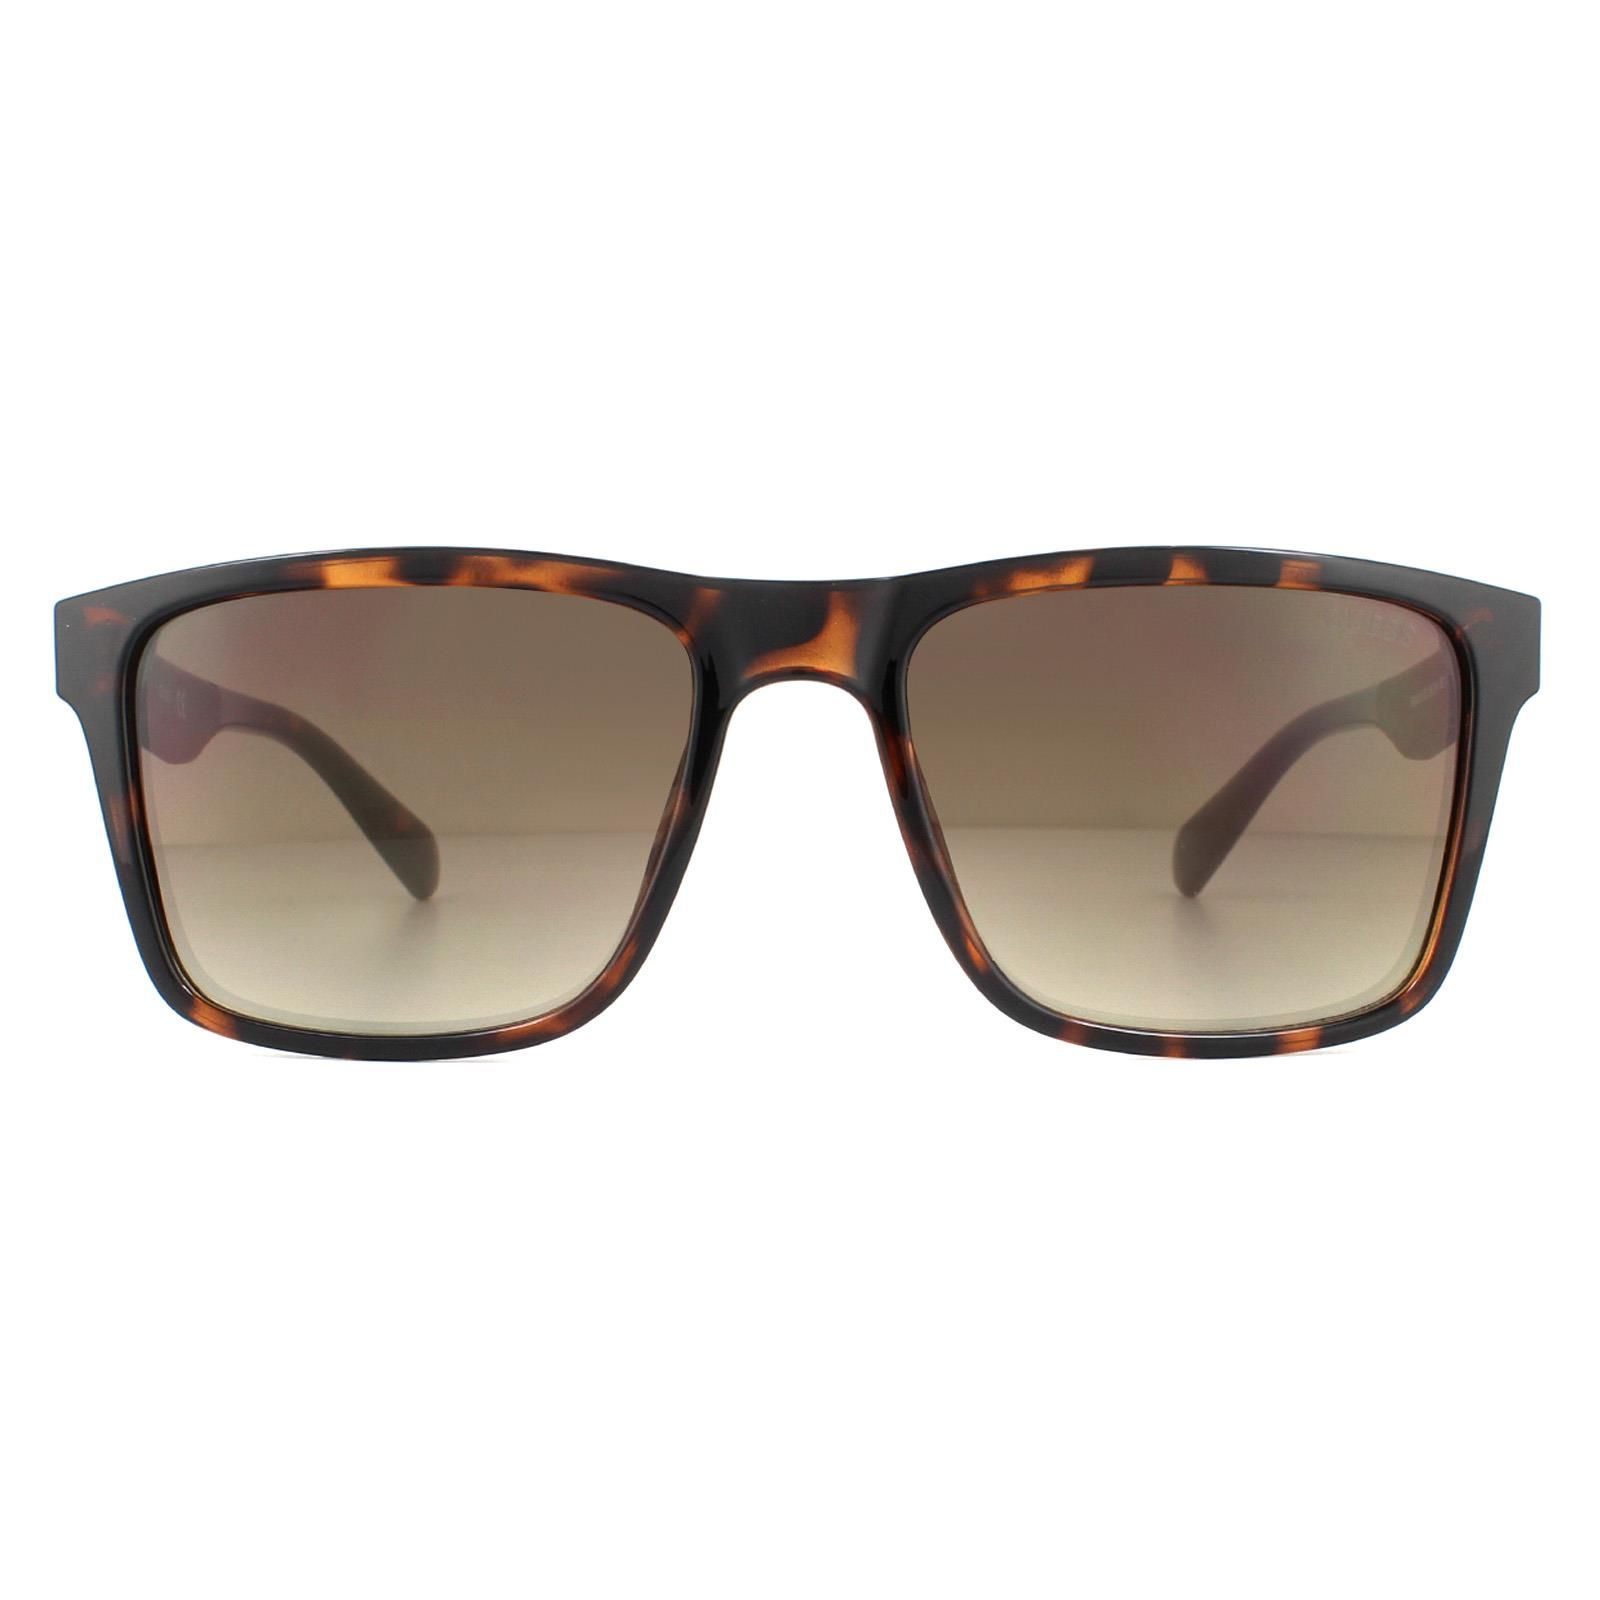 Guess Sunglasses GU6928 52G Dark Havana Black Brown Gradient are a classic rectangular style with the Guess G logo on the temples.